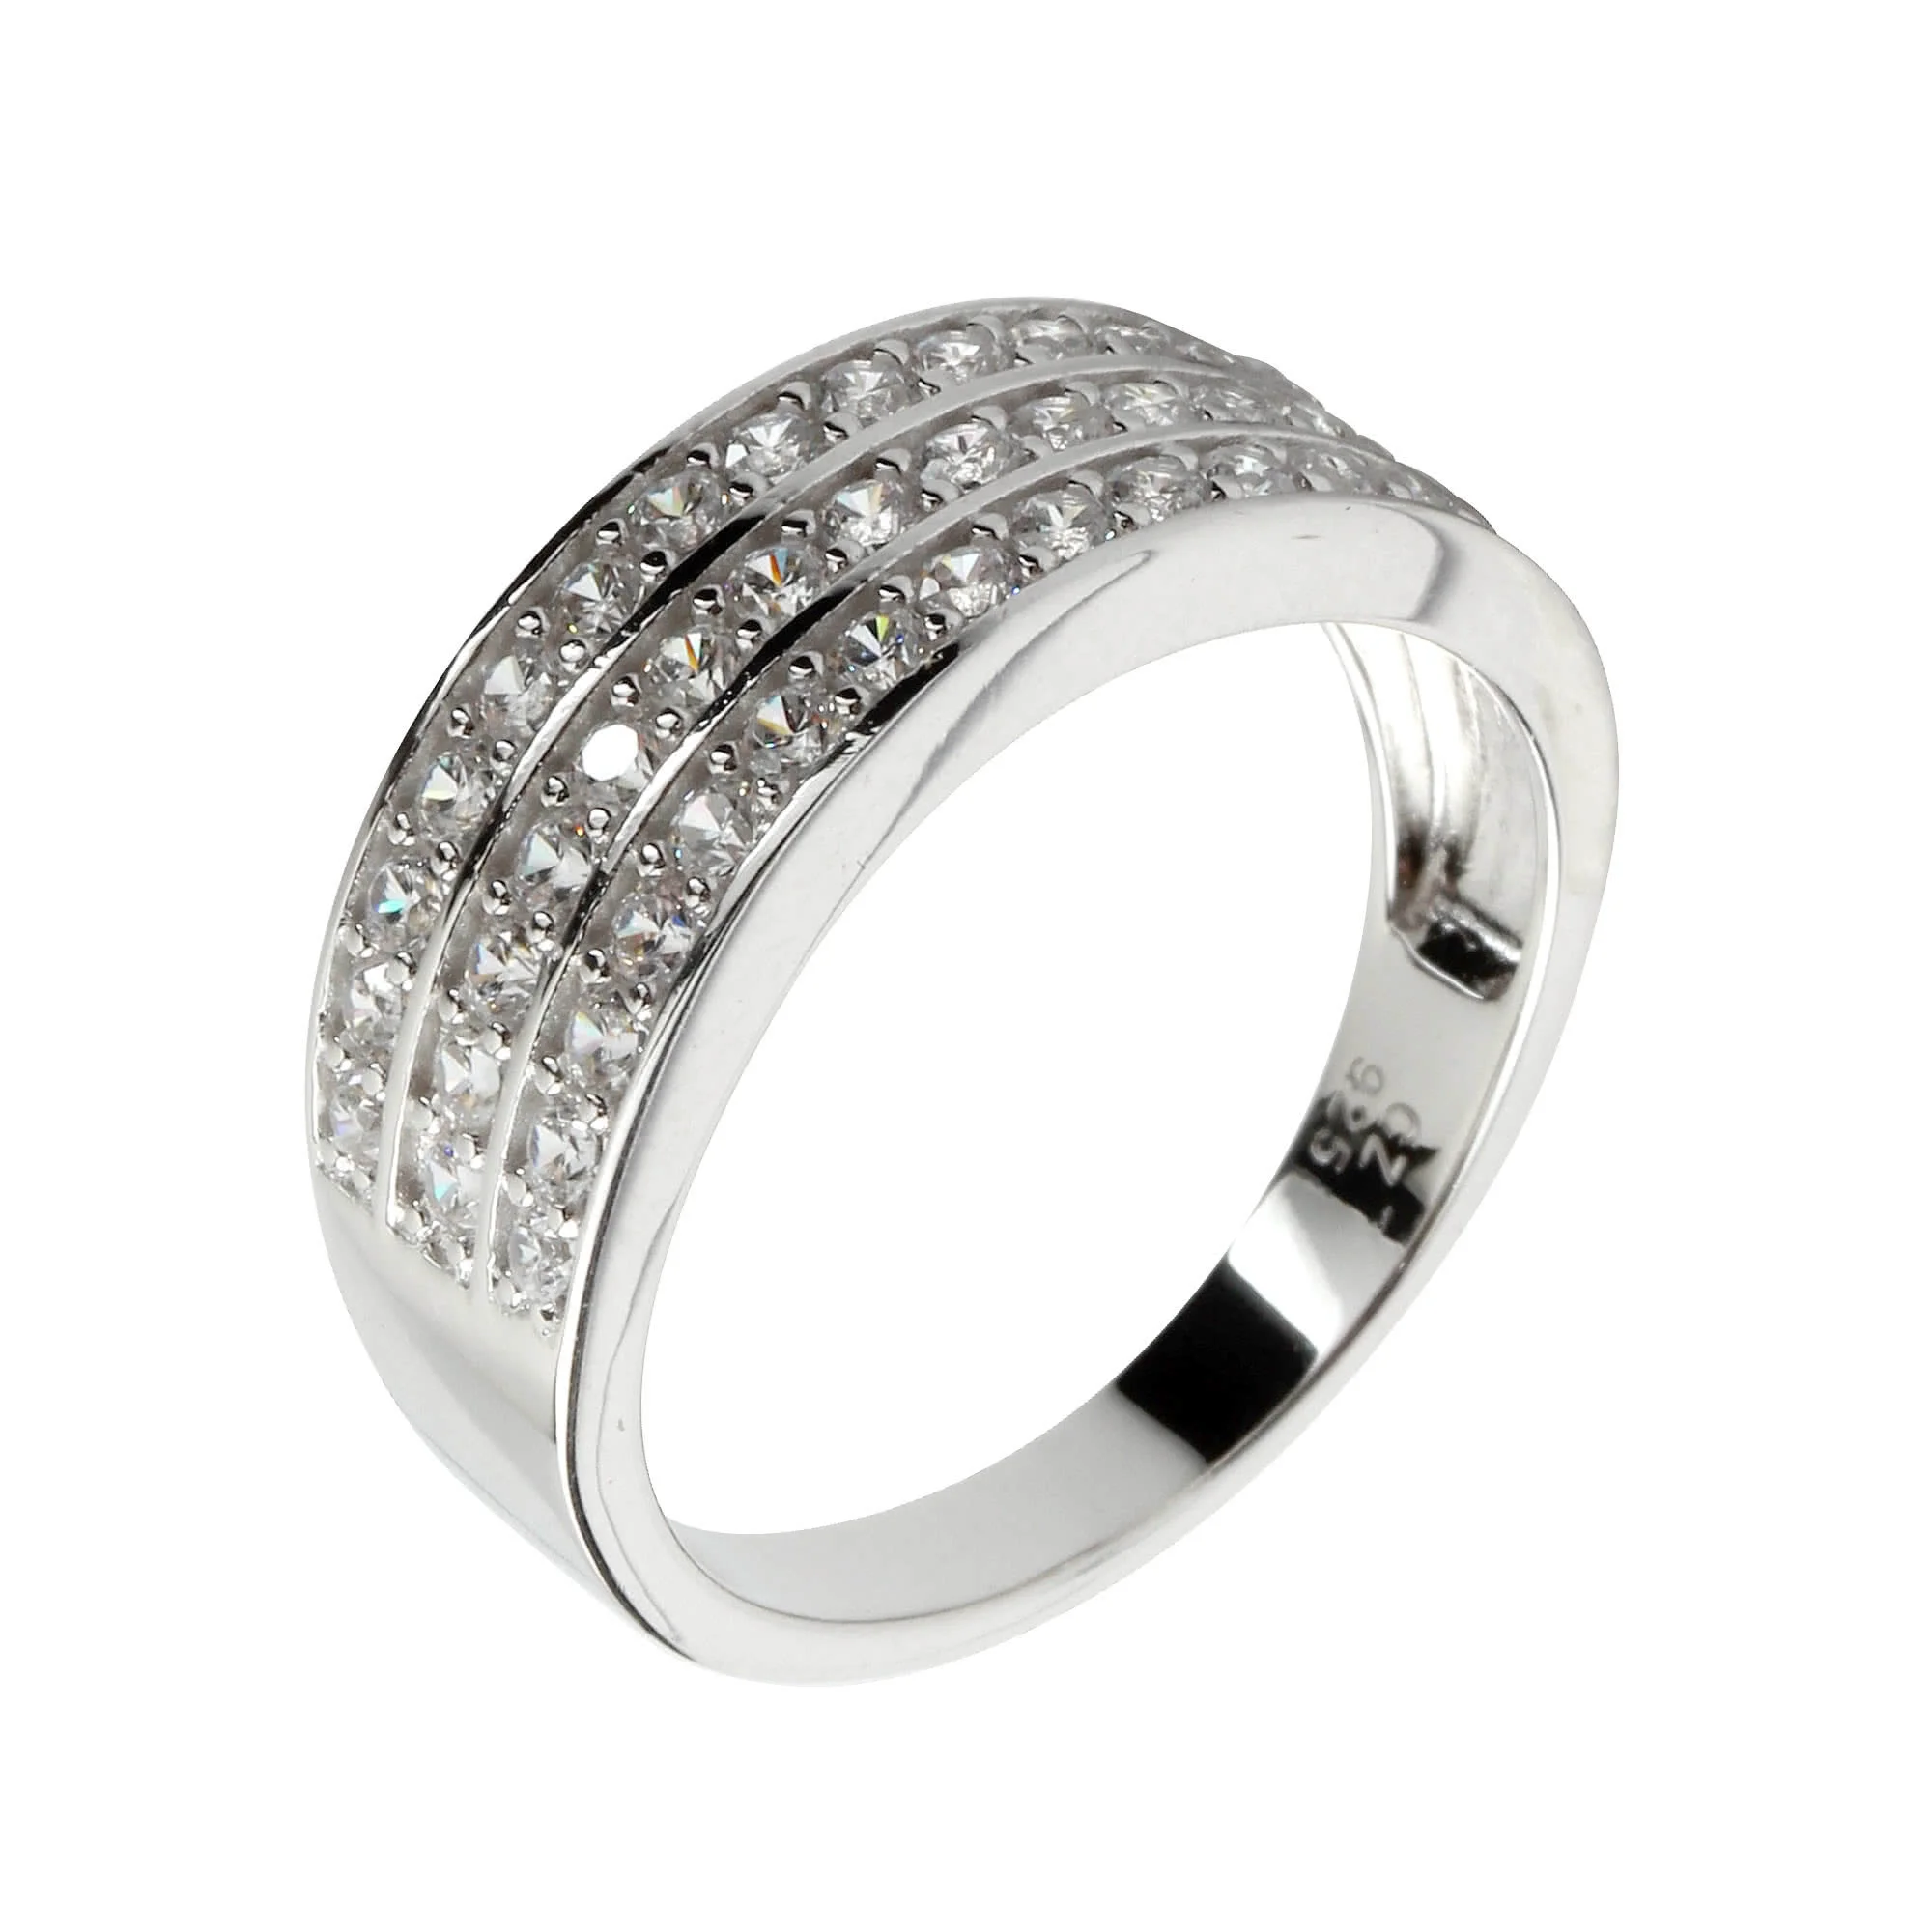 Triple Channel Set CZ Sterling Silver Ring - Rhodium Plated